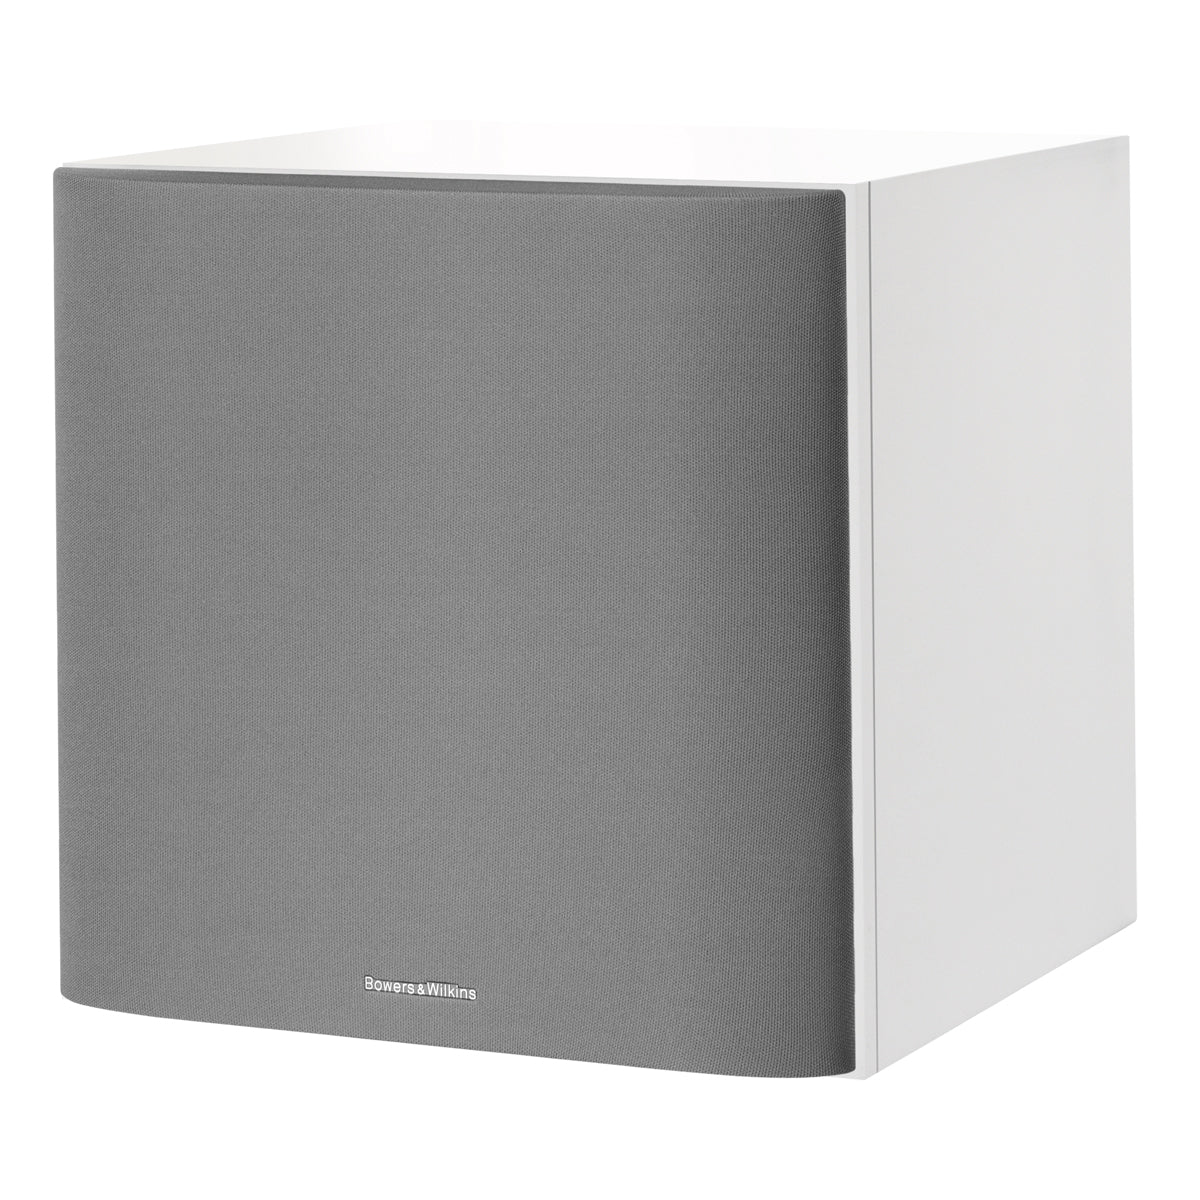 Bowers & Wilkins ASW610XP 10" 500W Subwoofer - White - The Audio Experts